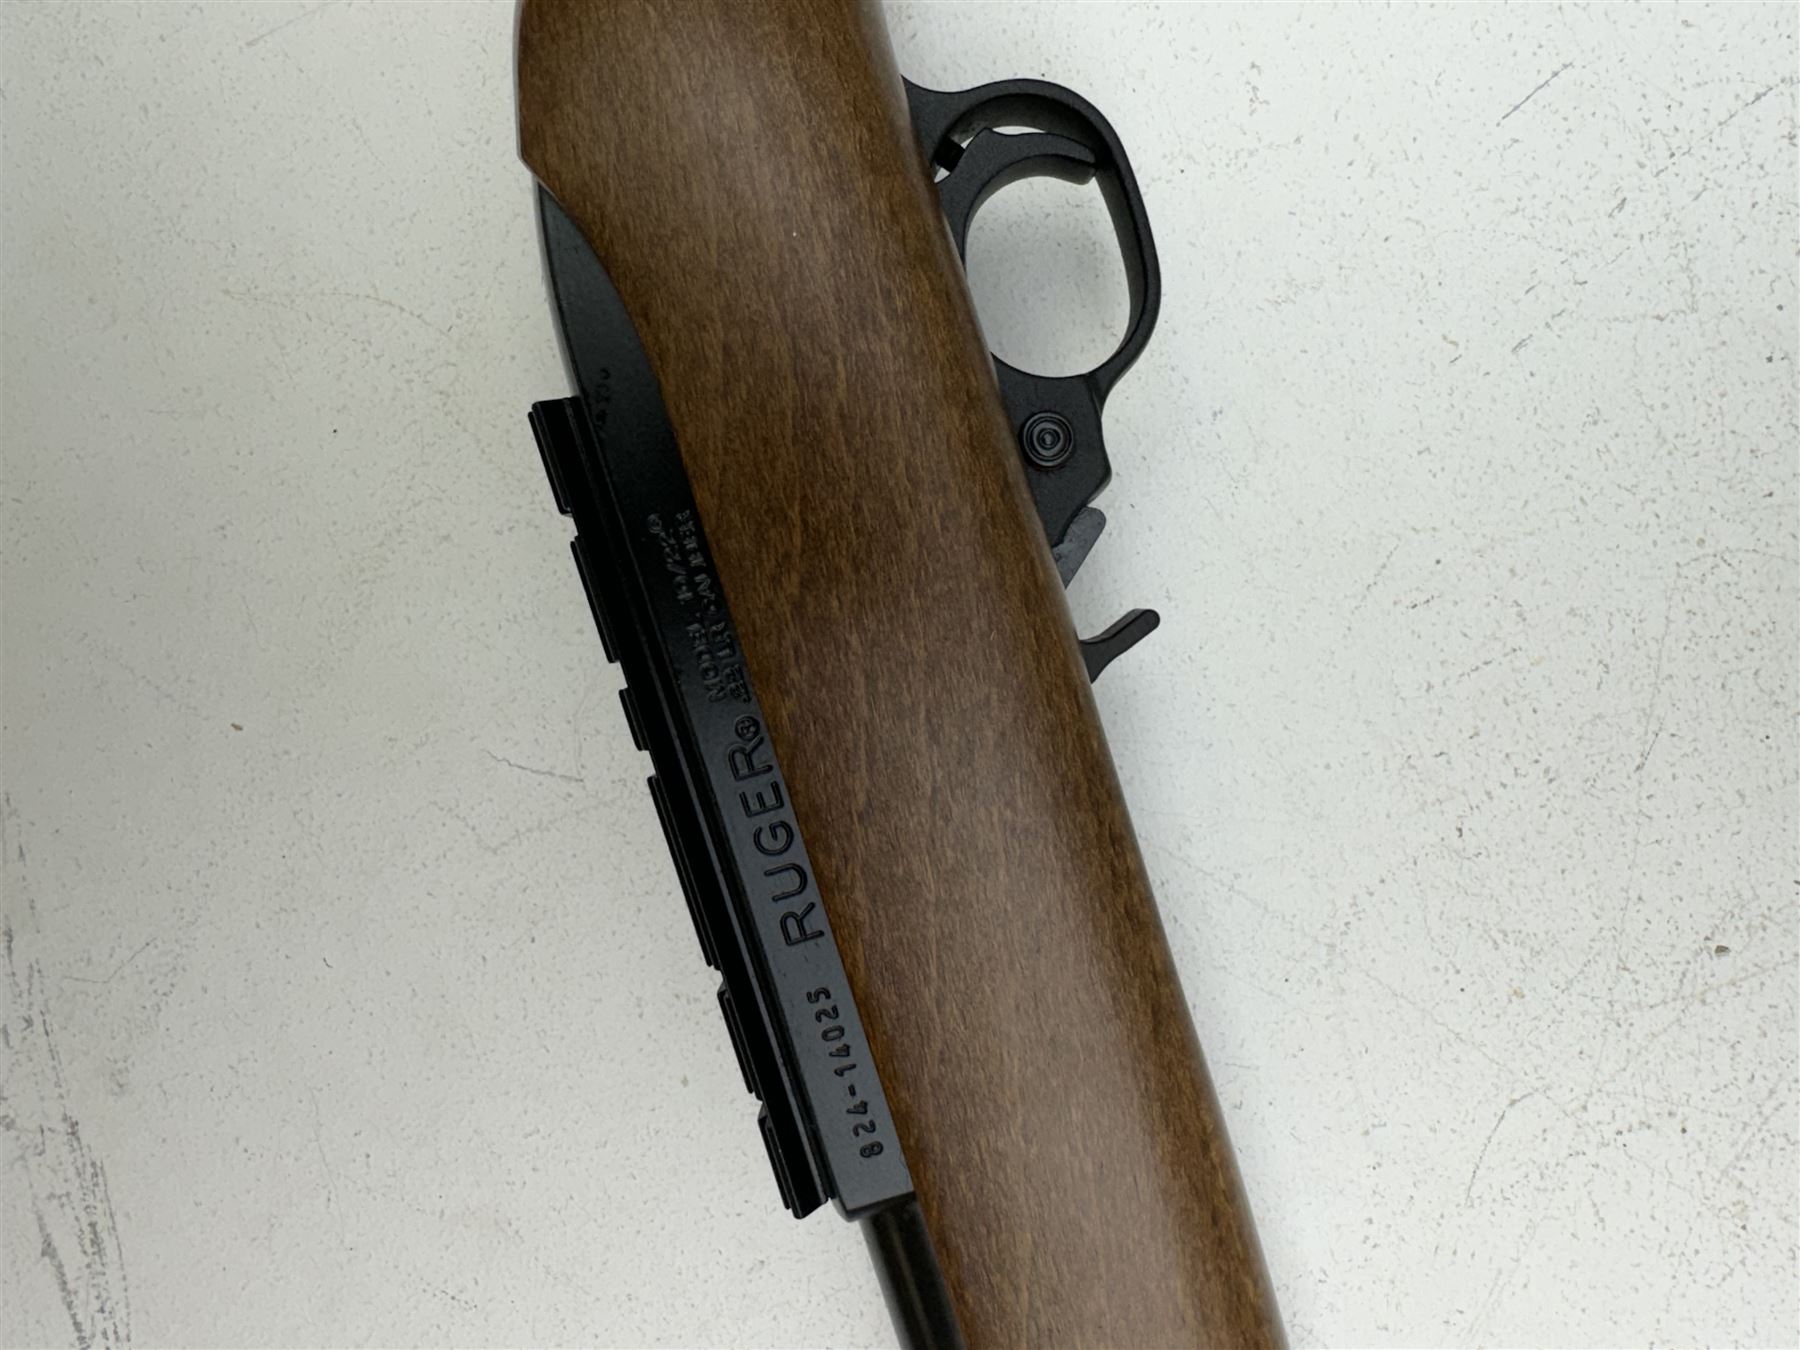 SECTION 1 FIREARMS CERTIFICATE REQUIRED - Ruger model 10-22 .22lr semi auto rifle with 46cm (18") ba - Image 7 of 13